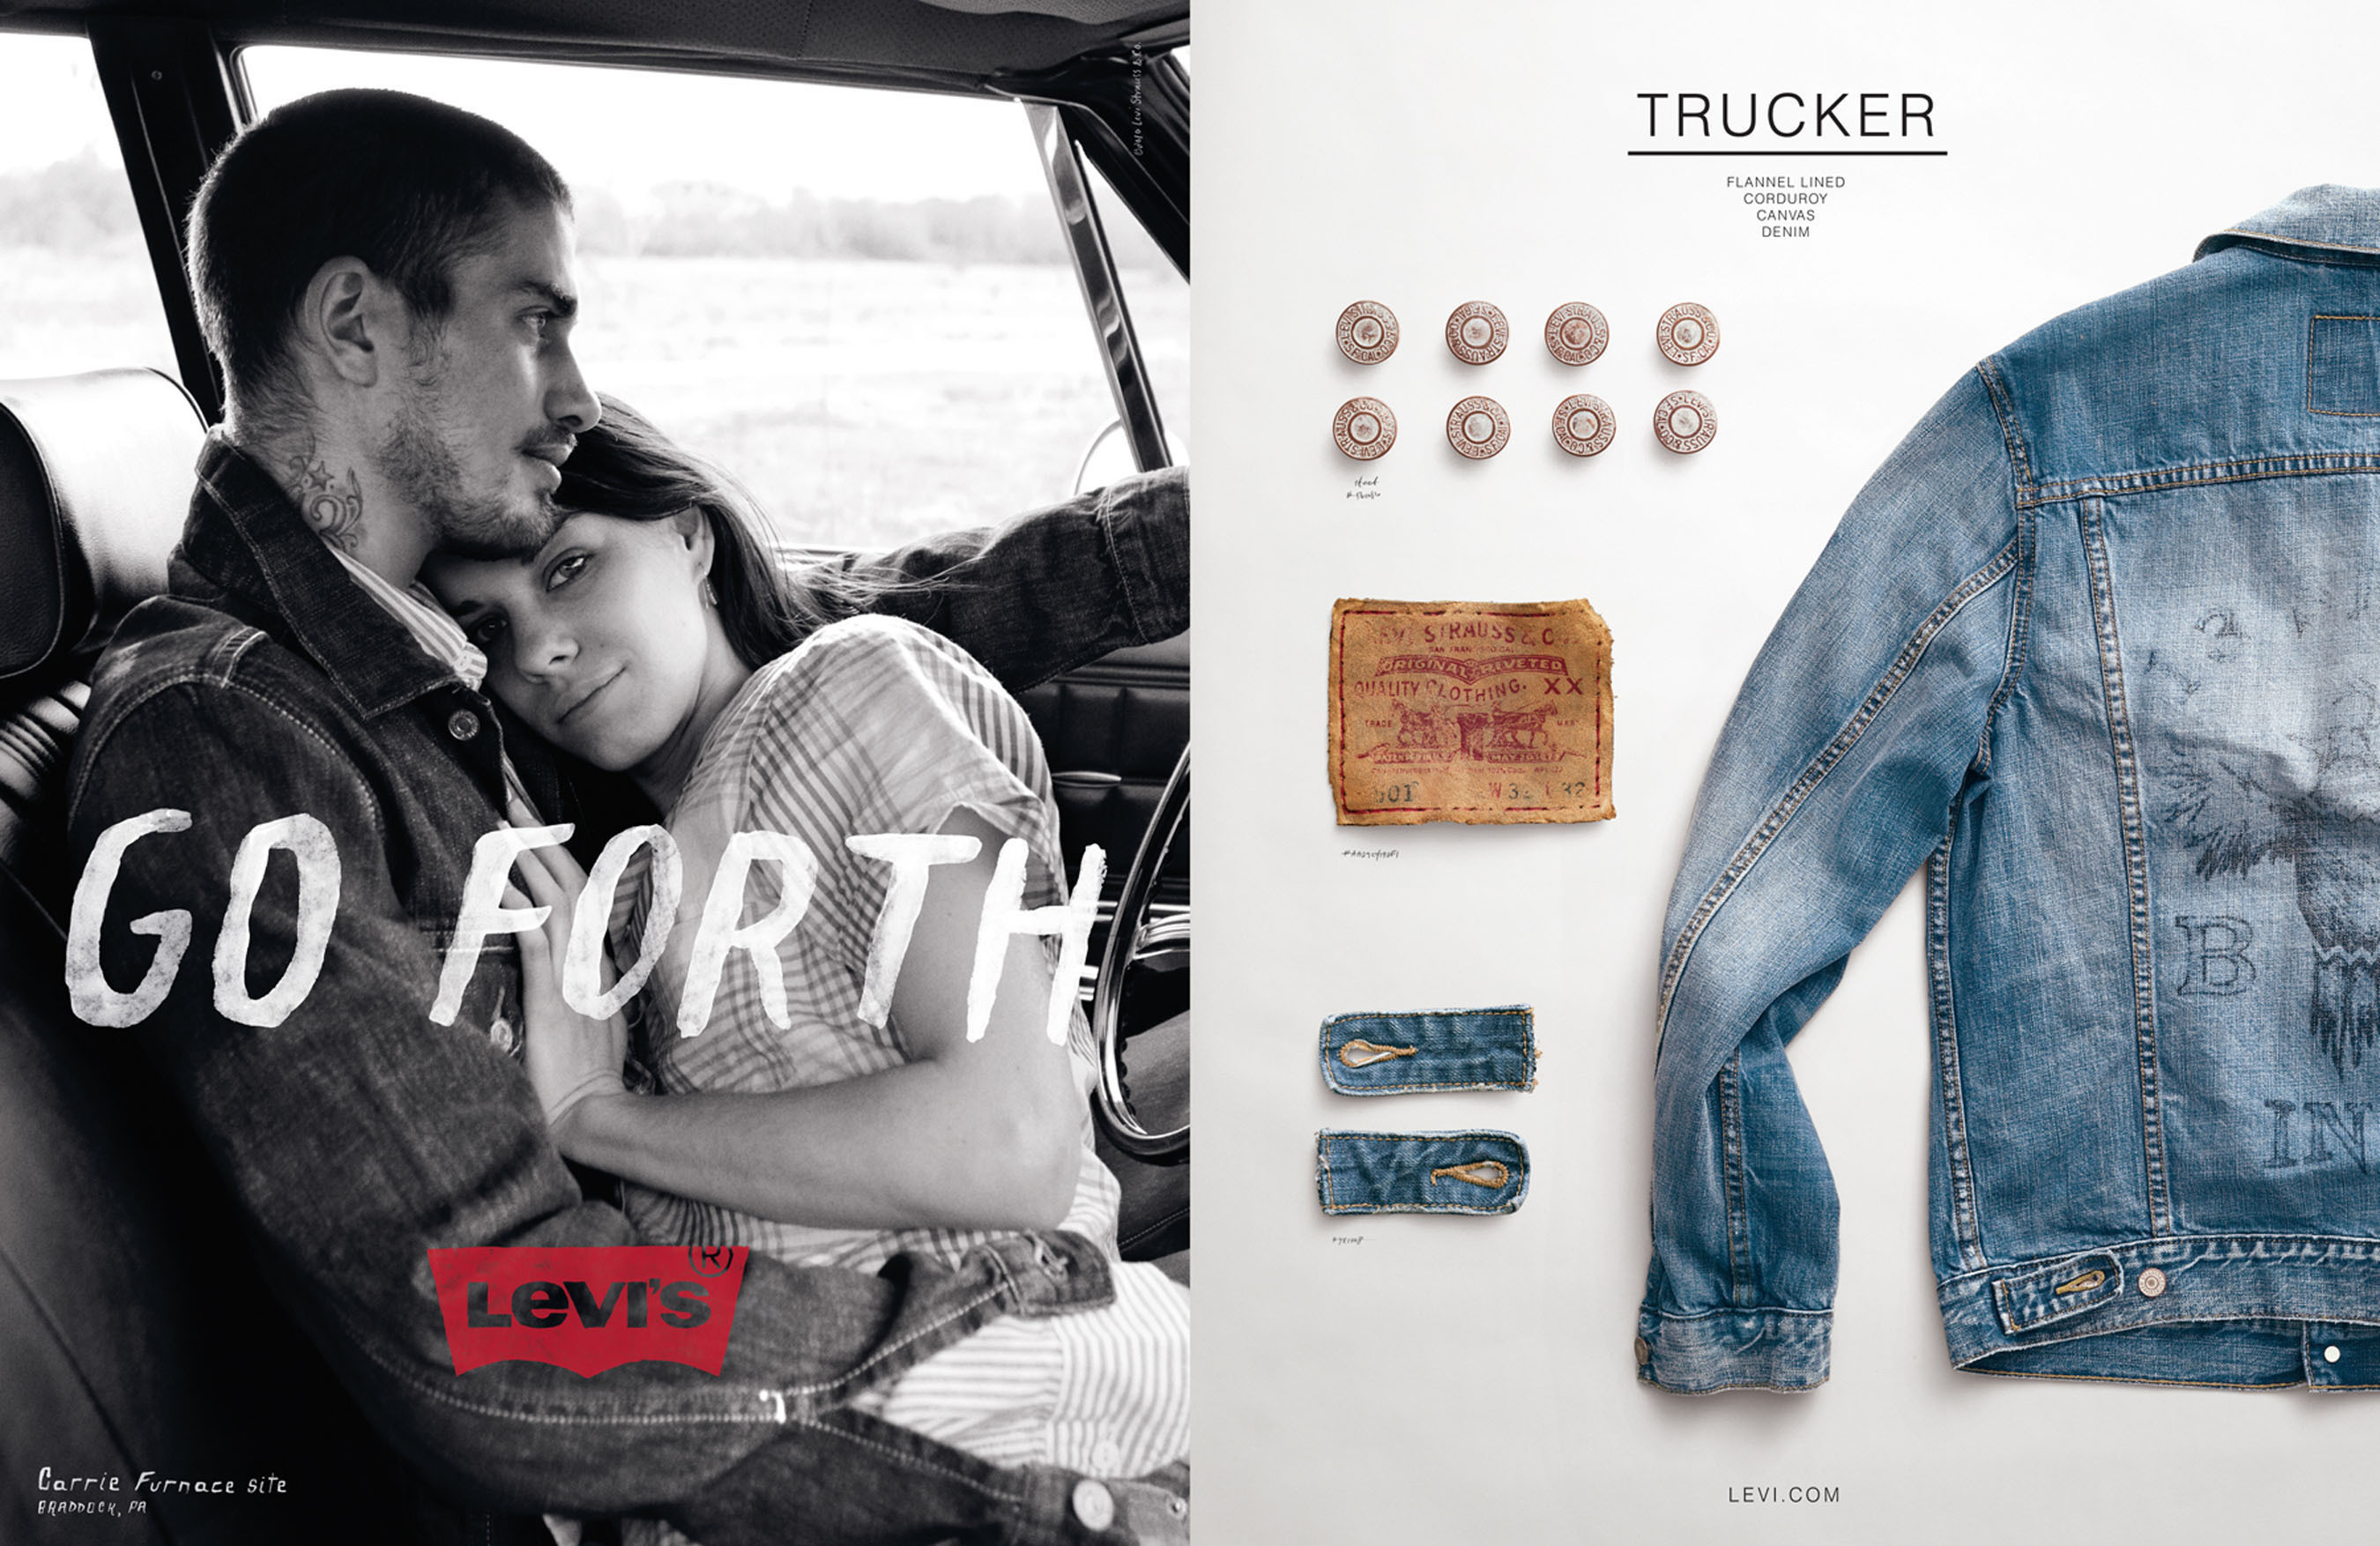 Levi's(R) Proclaims 'We Are All Workers' With Launch of Latest Go Forth  Marketing Campaign